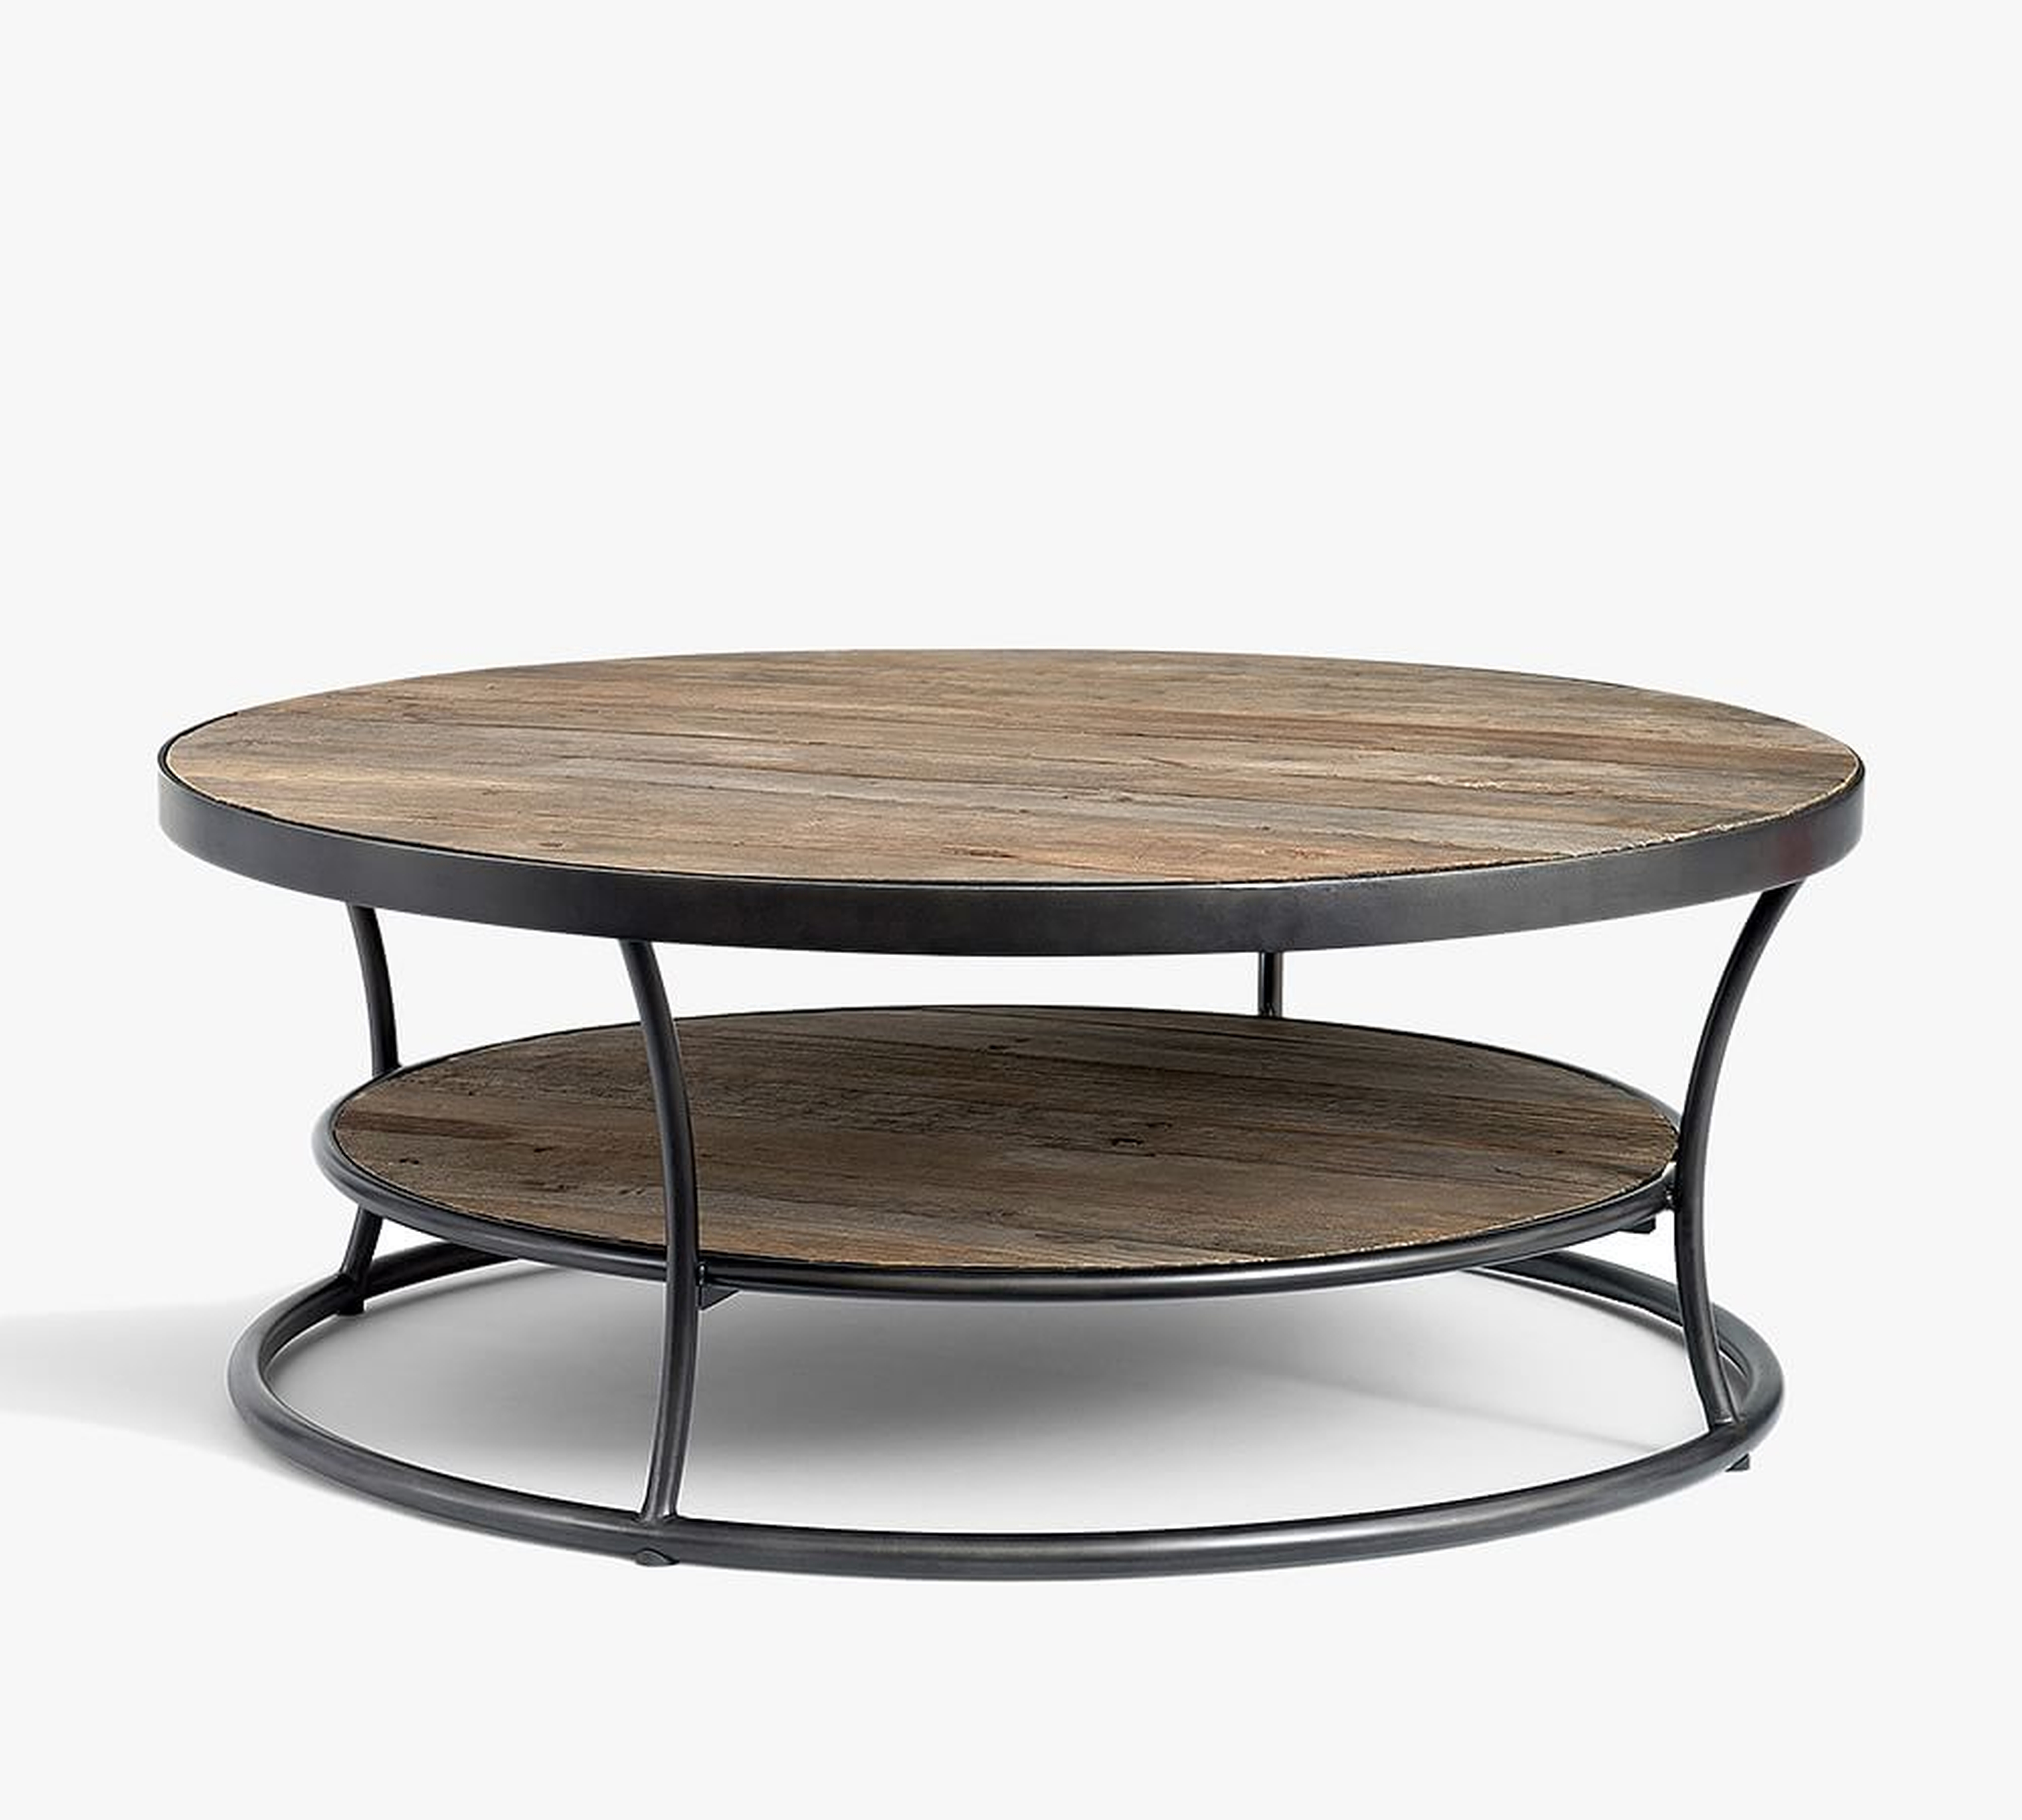 Bartlett Round Metal & Reclaimed Wood Coffee Table, 42.5"L - Pottery Barn